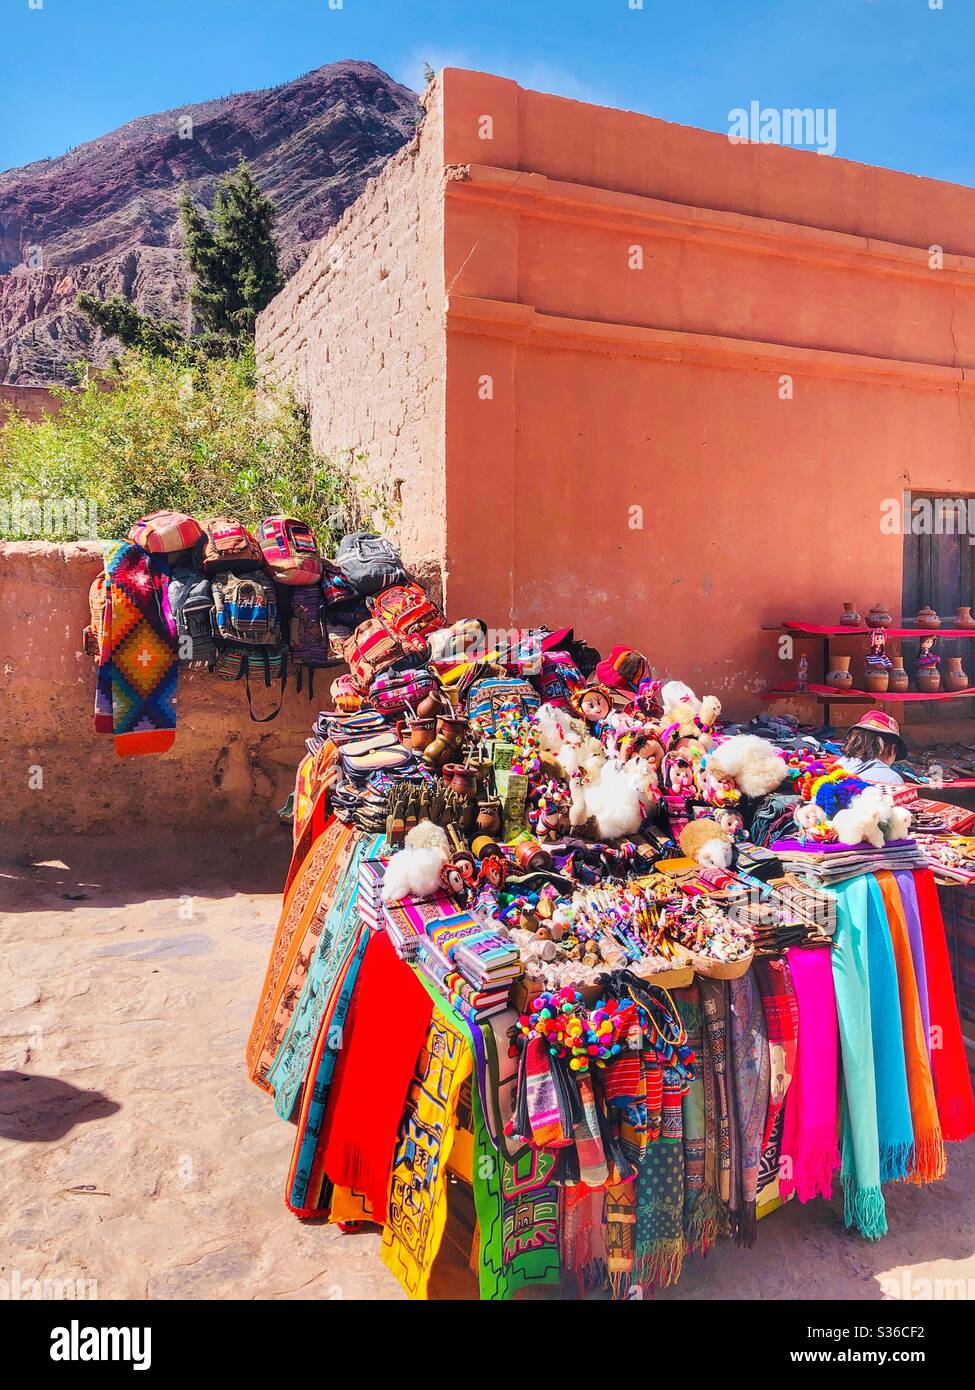 Colourful local handicrafts for sale in Purmamarca, a Unesco World Heritage Site in the desert landscape in Northern Argentina. Stock Photo